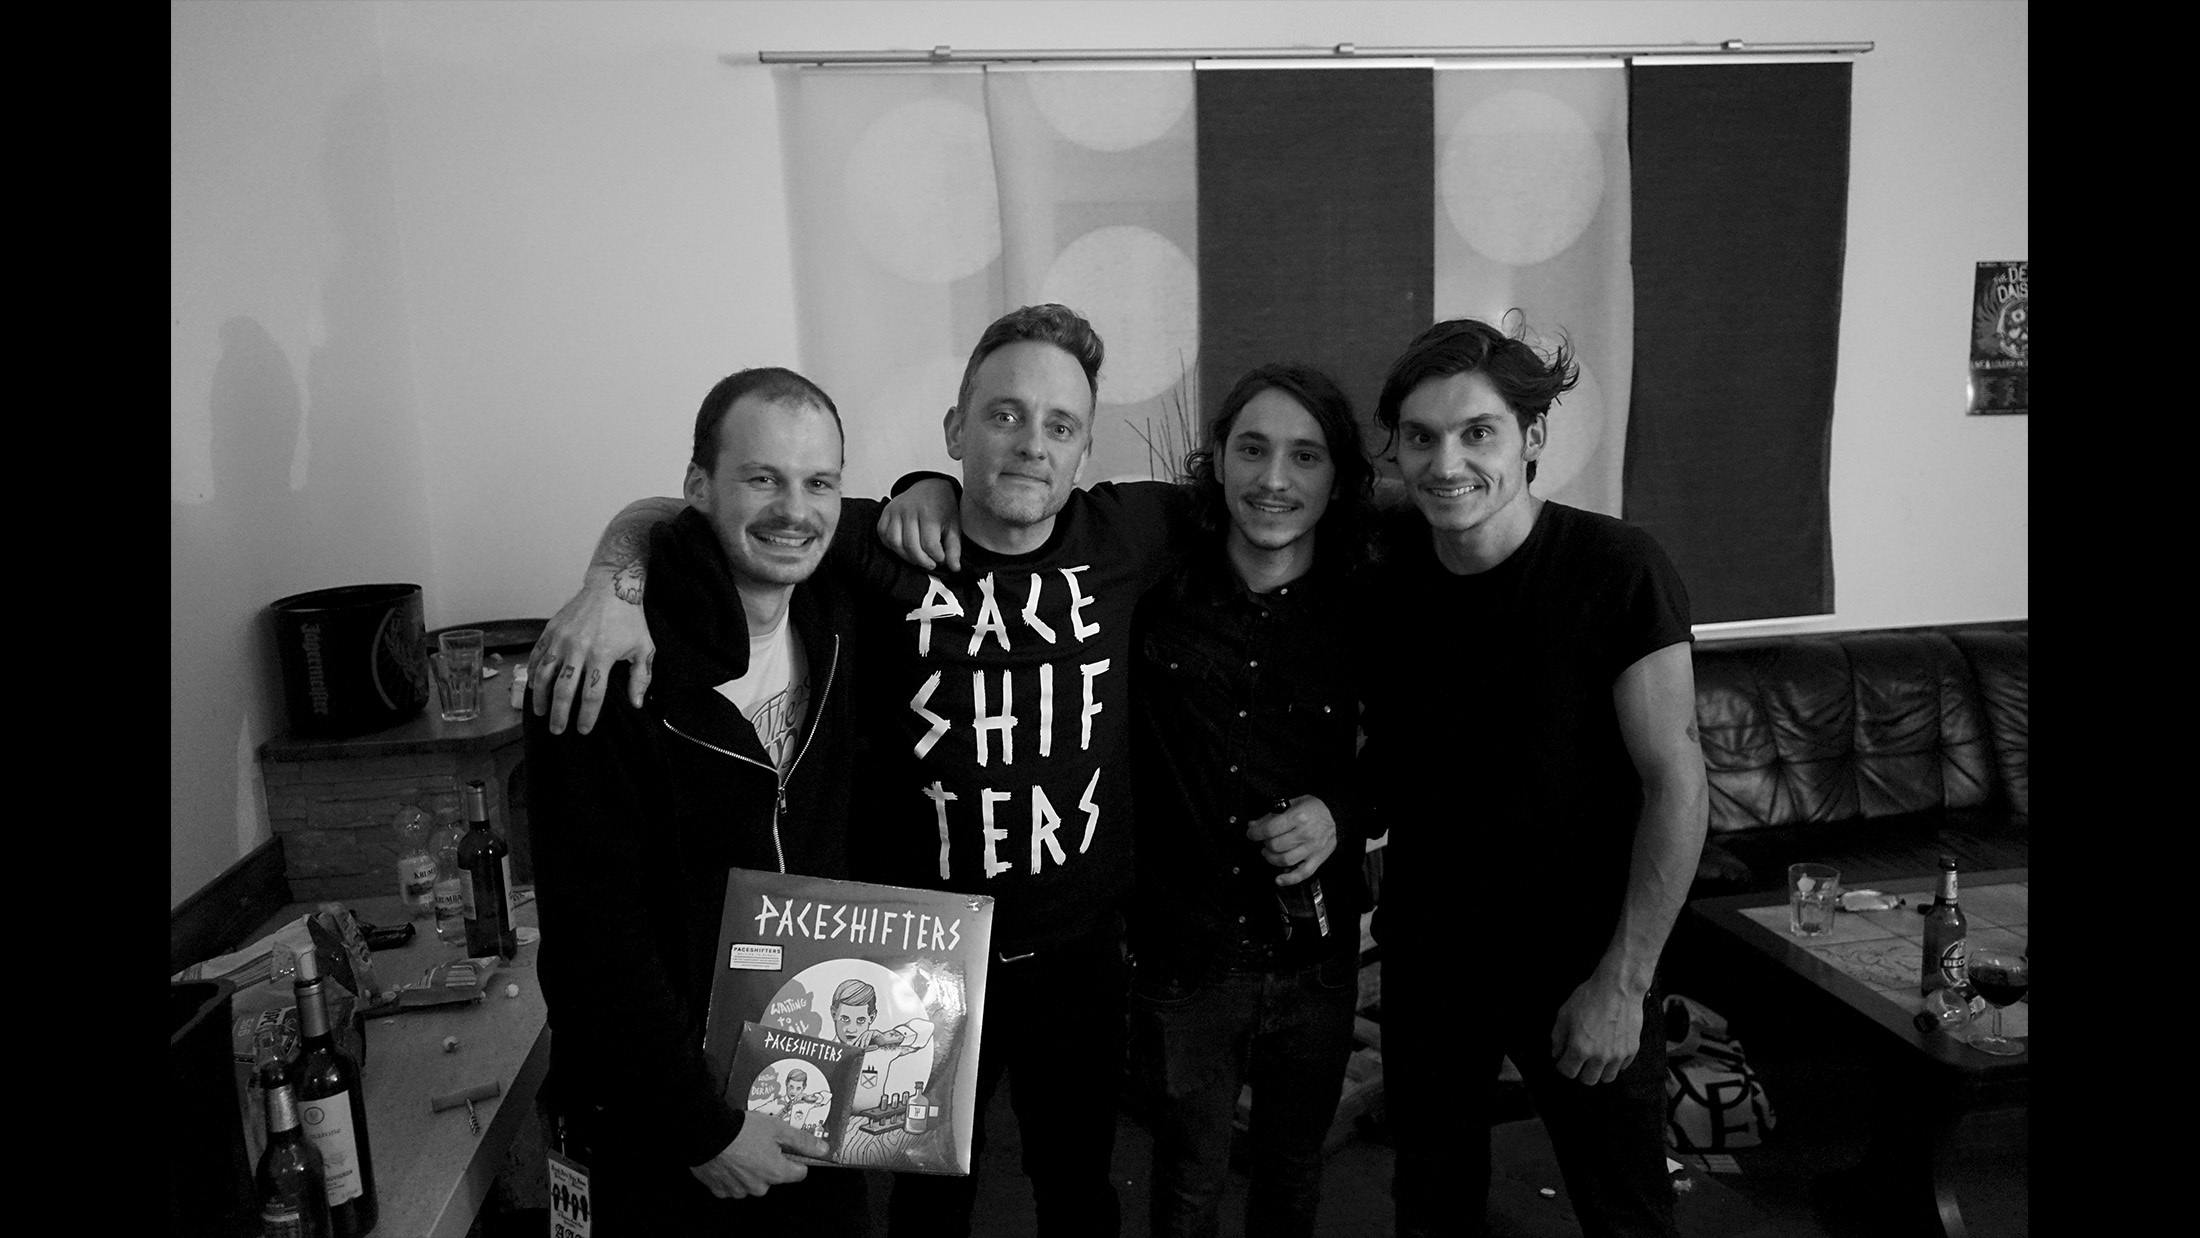 Celebrating the release of our new record together with Dave Hause!